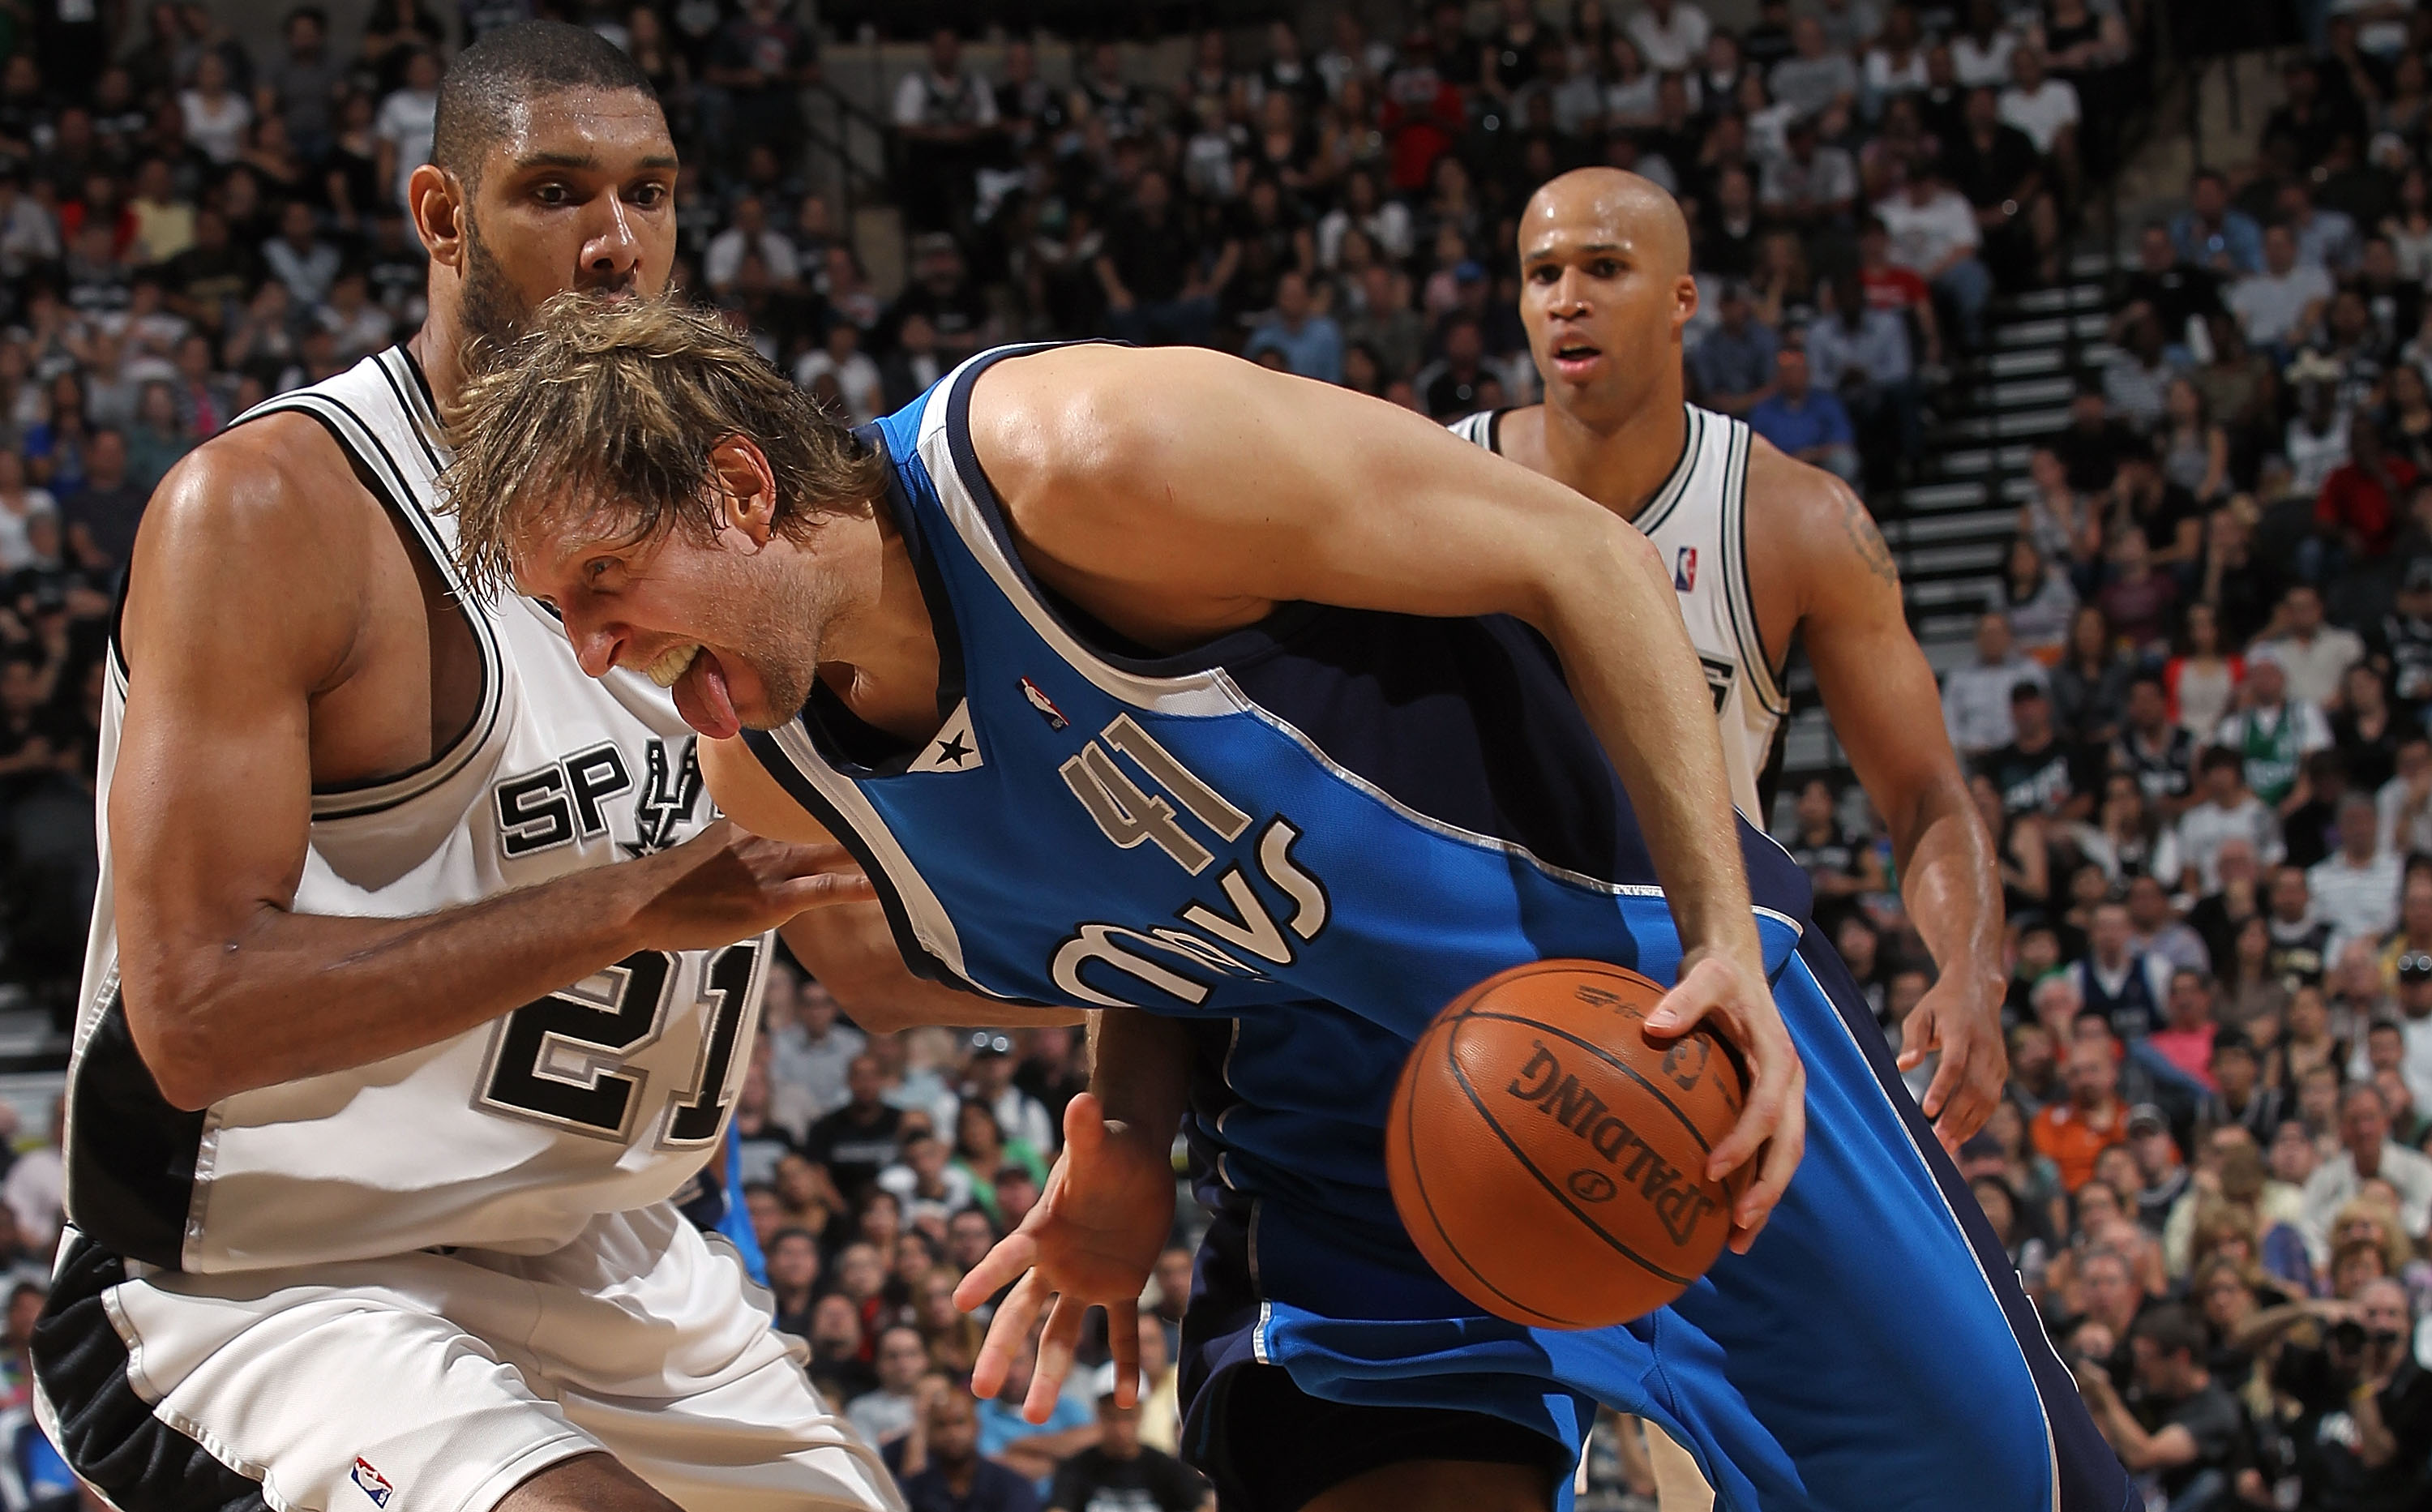 SAN ANTONIO - APRIL 25:  Forward Dirk Nowitzki #41 of the Dallas Mavericks dribbles the ball past Tim Duncan #21 of the San Antonio Spurs in Game Four of the Western Conference Quarterfinals during the 2010 NBA Playoffs at AT&T Center on April 25, 2010 in